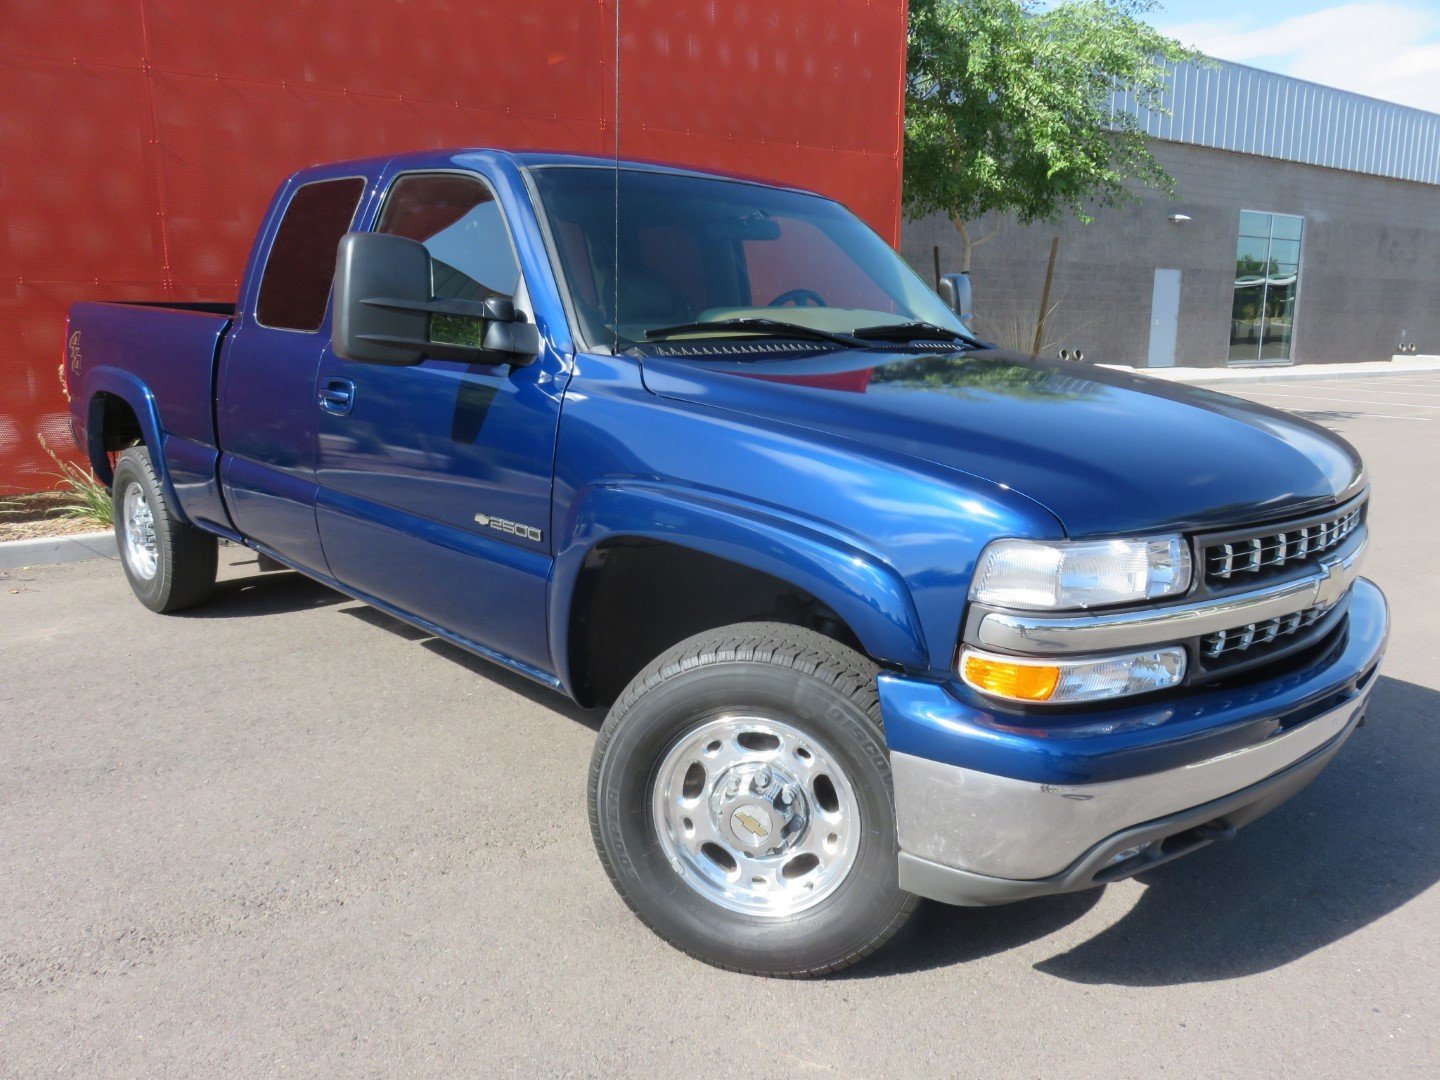 2000 Chevrolet 2500 | Canyon State Classics